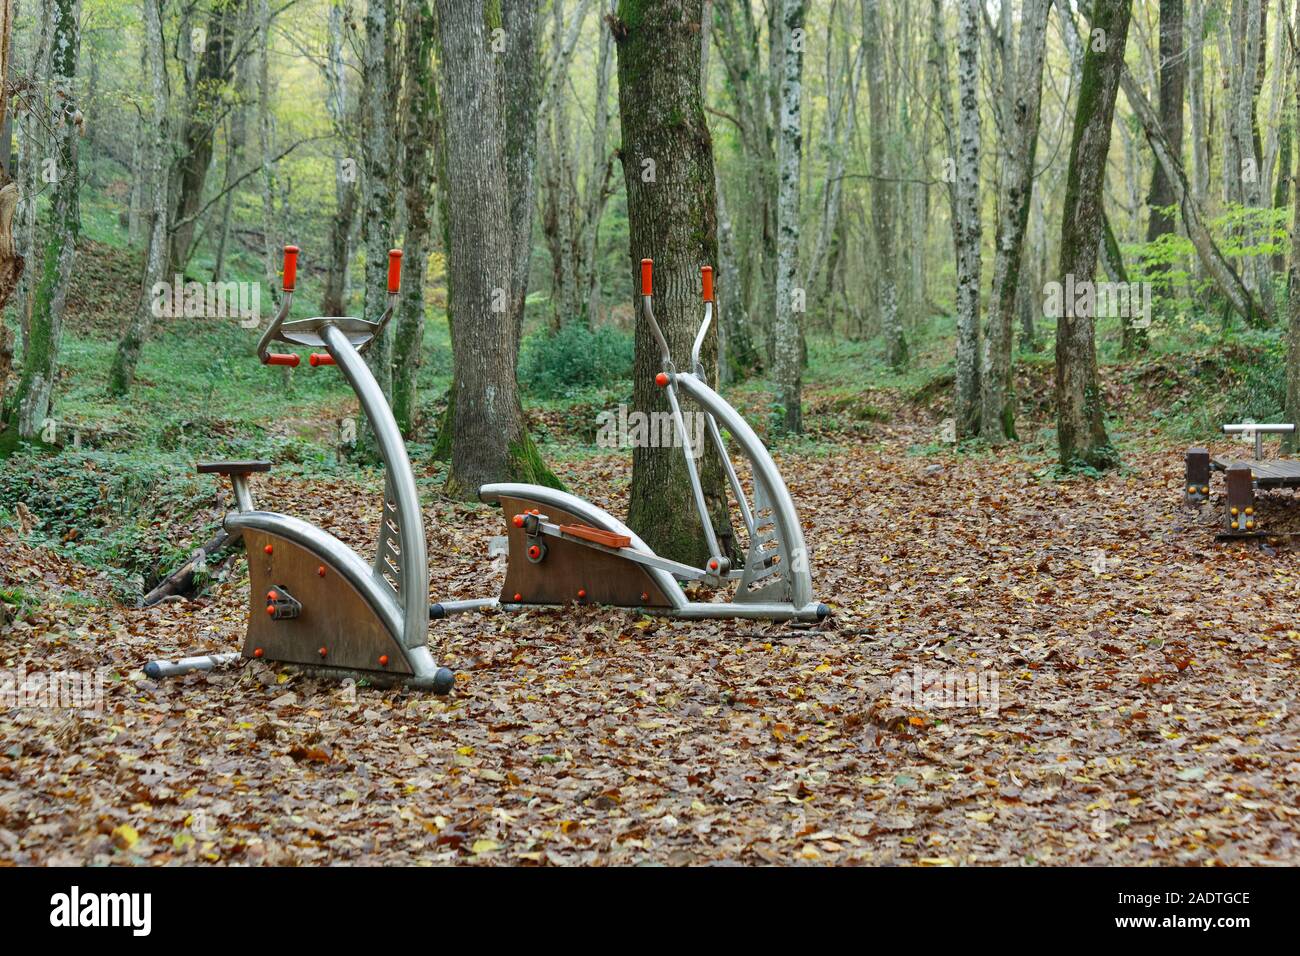 Elliptical sky walker and spin bike fitness equipment in a public park on autumn season with dry leaves on the ground. Belgrad Forest in Istanbul. Stock Photo